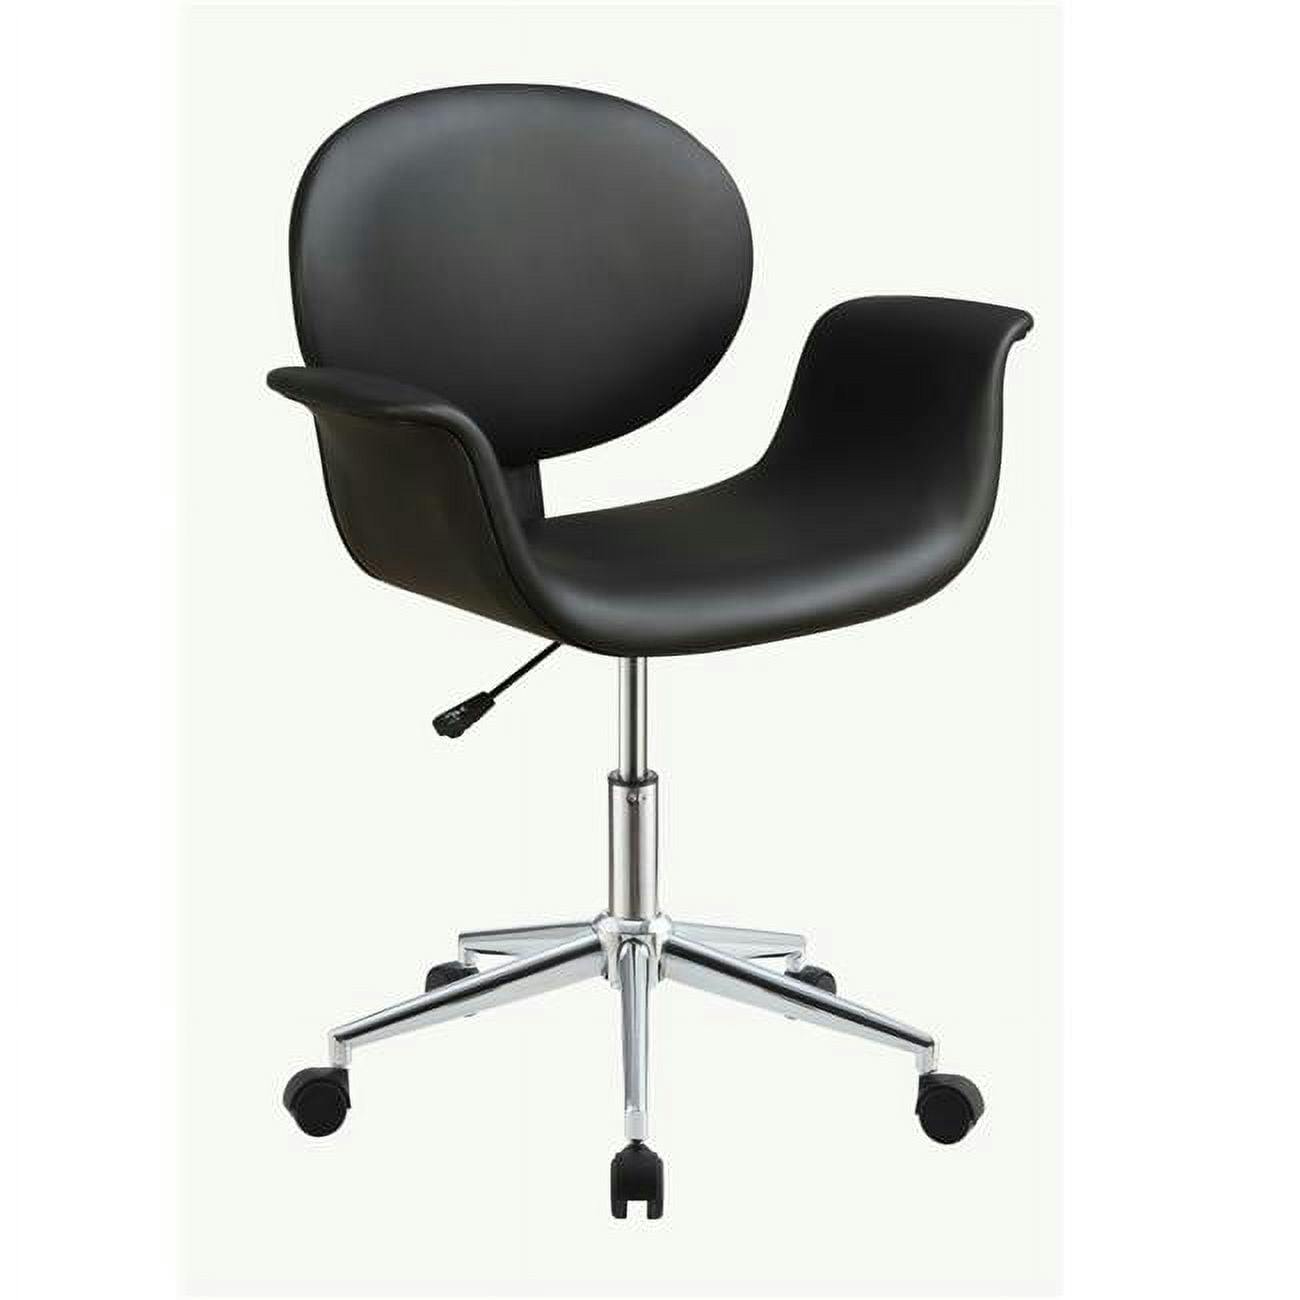 Modern Black PU Leather Adjustable Office Chair with Chrome Base